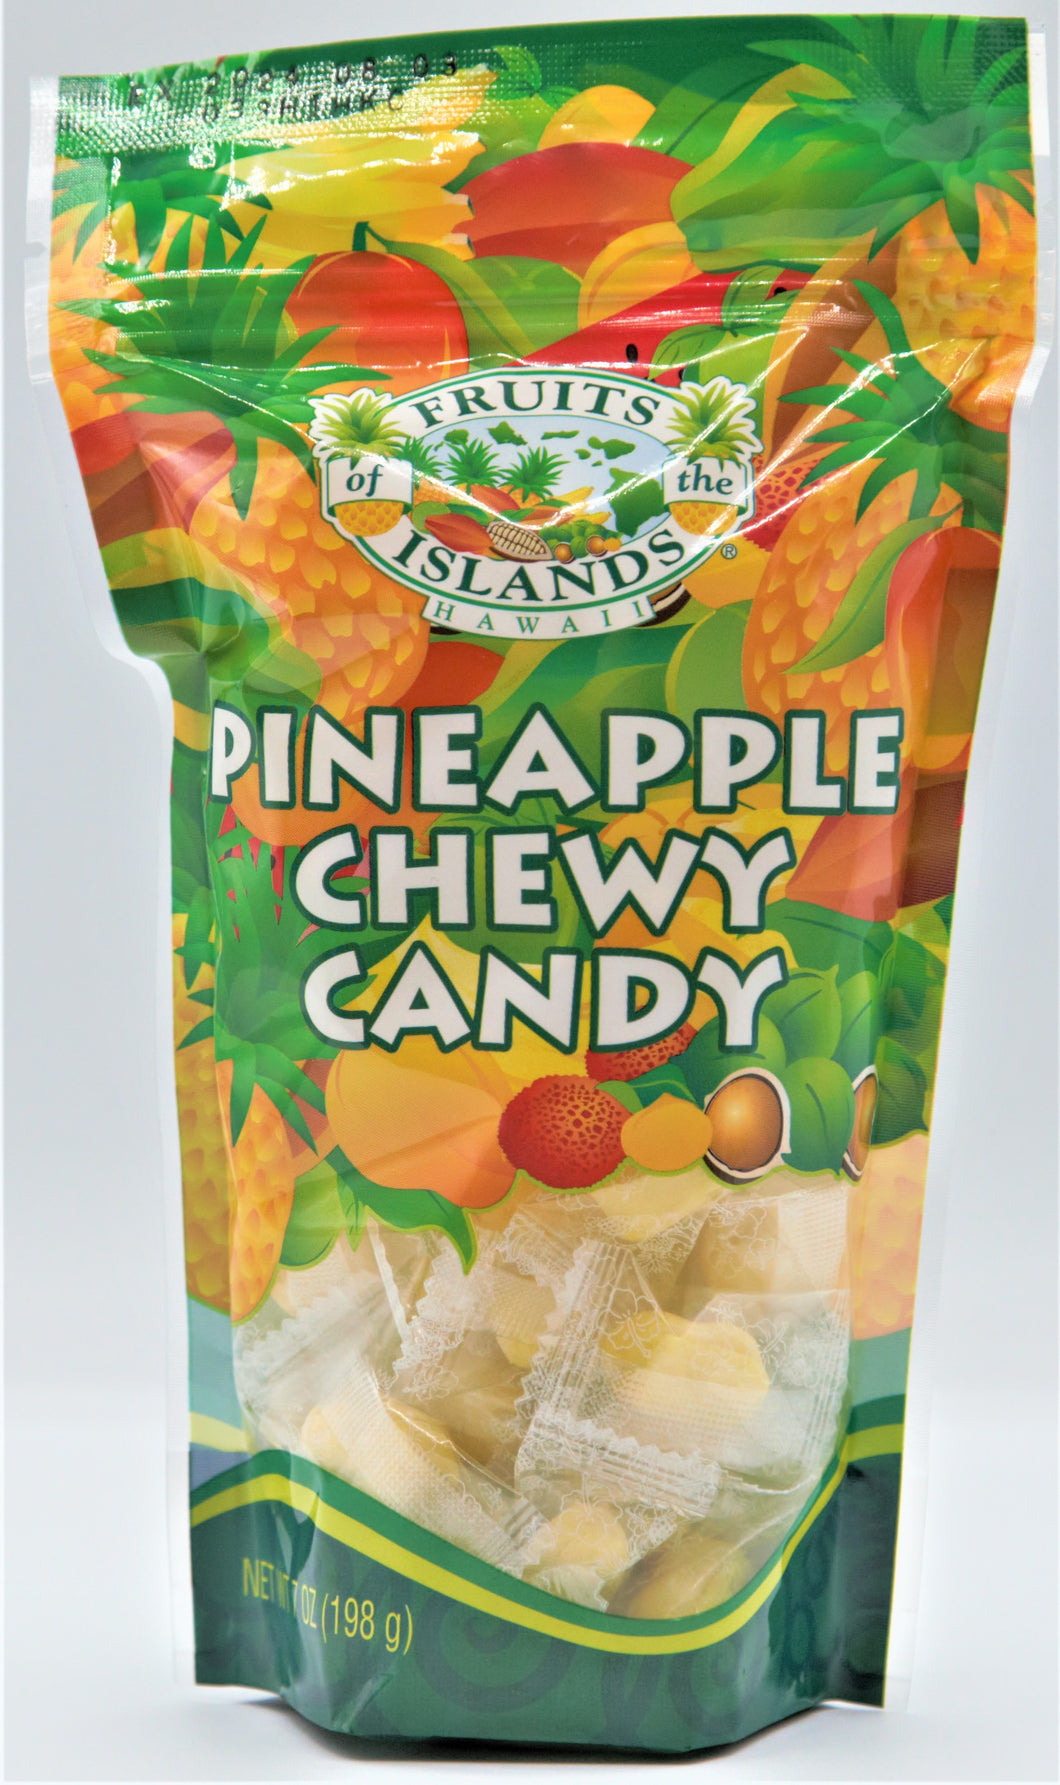 Pineapple Chewy Candy 7oz (198g)